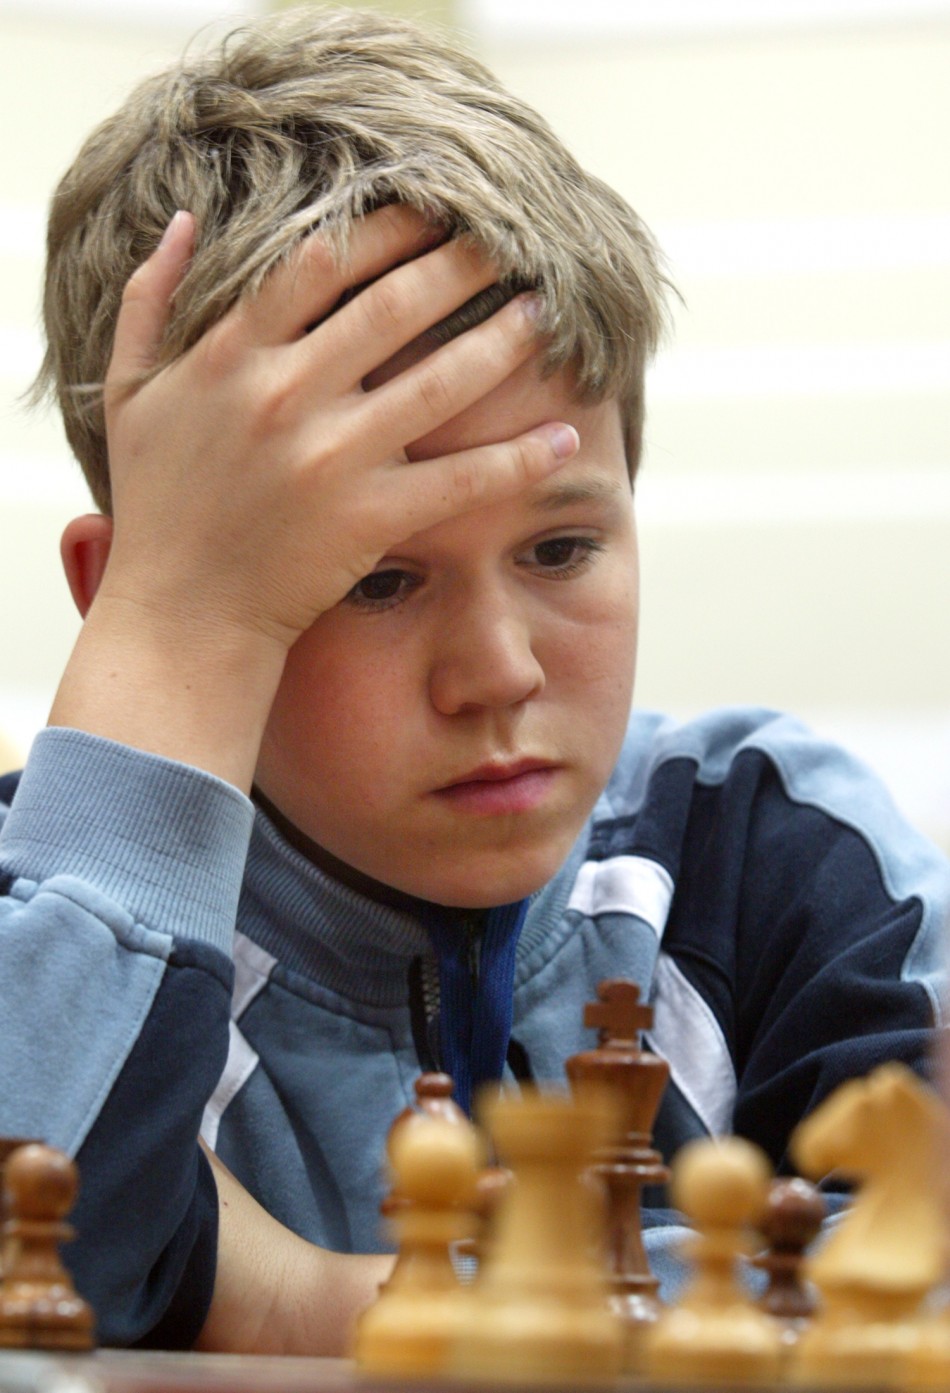 13 year old Norwegian Magnus Carlsen concentrates during a match with Belarus player Alexei Fedorov in the Dubai Open Chess championship in April 2004